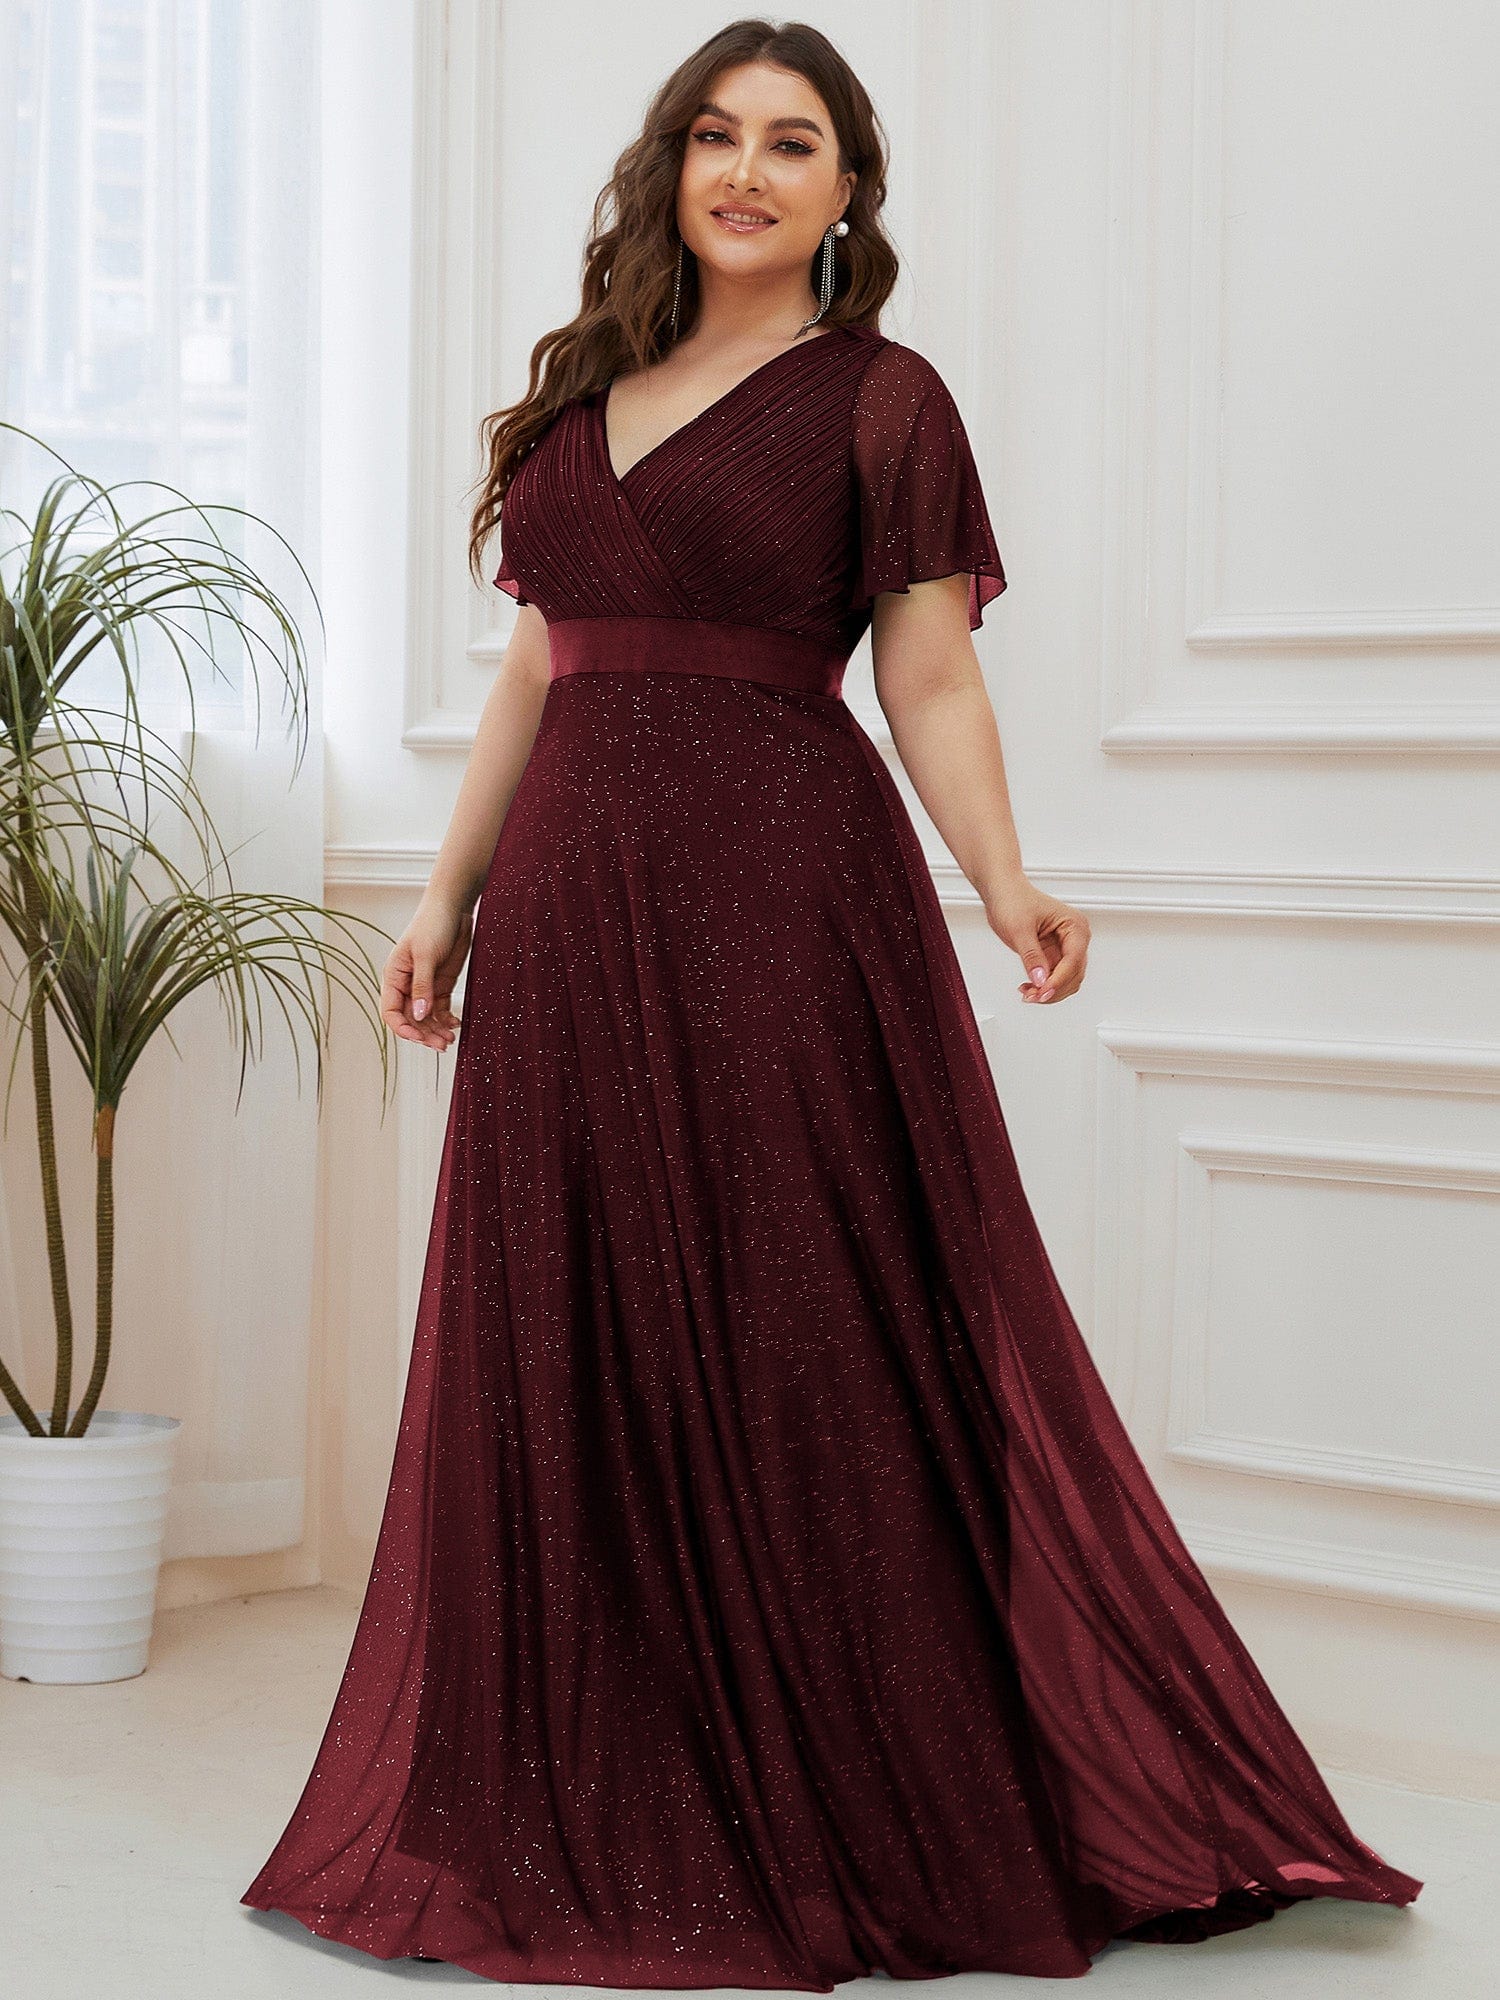 Plus Size fat woman bodycon dress Ladies Long Sleeves Gown